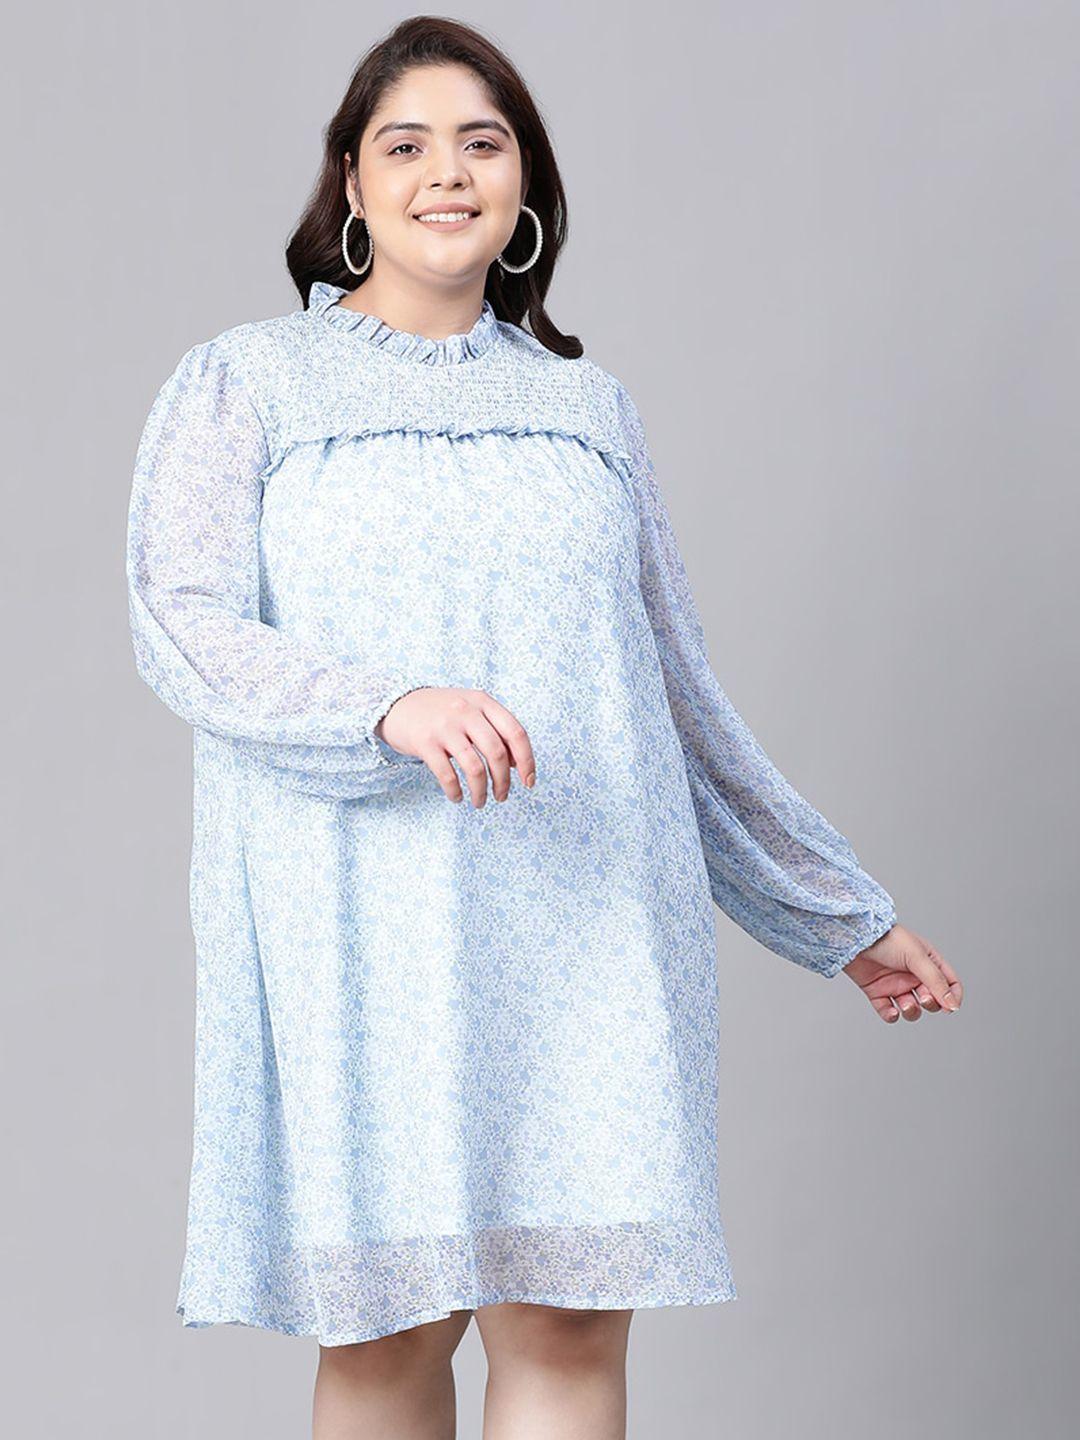 oxolloxo plus size floral printed smocked chiffon a-line dress